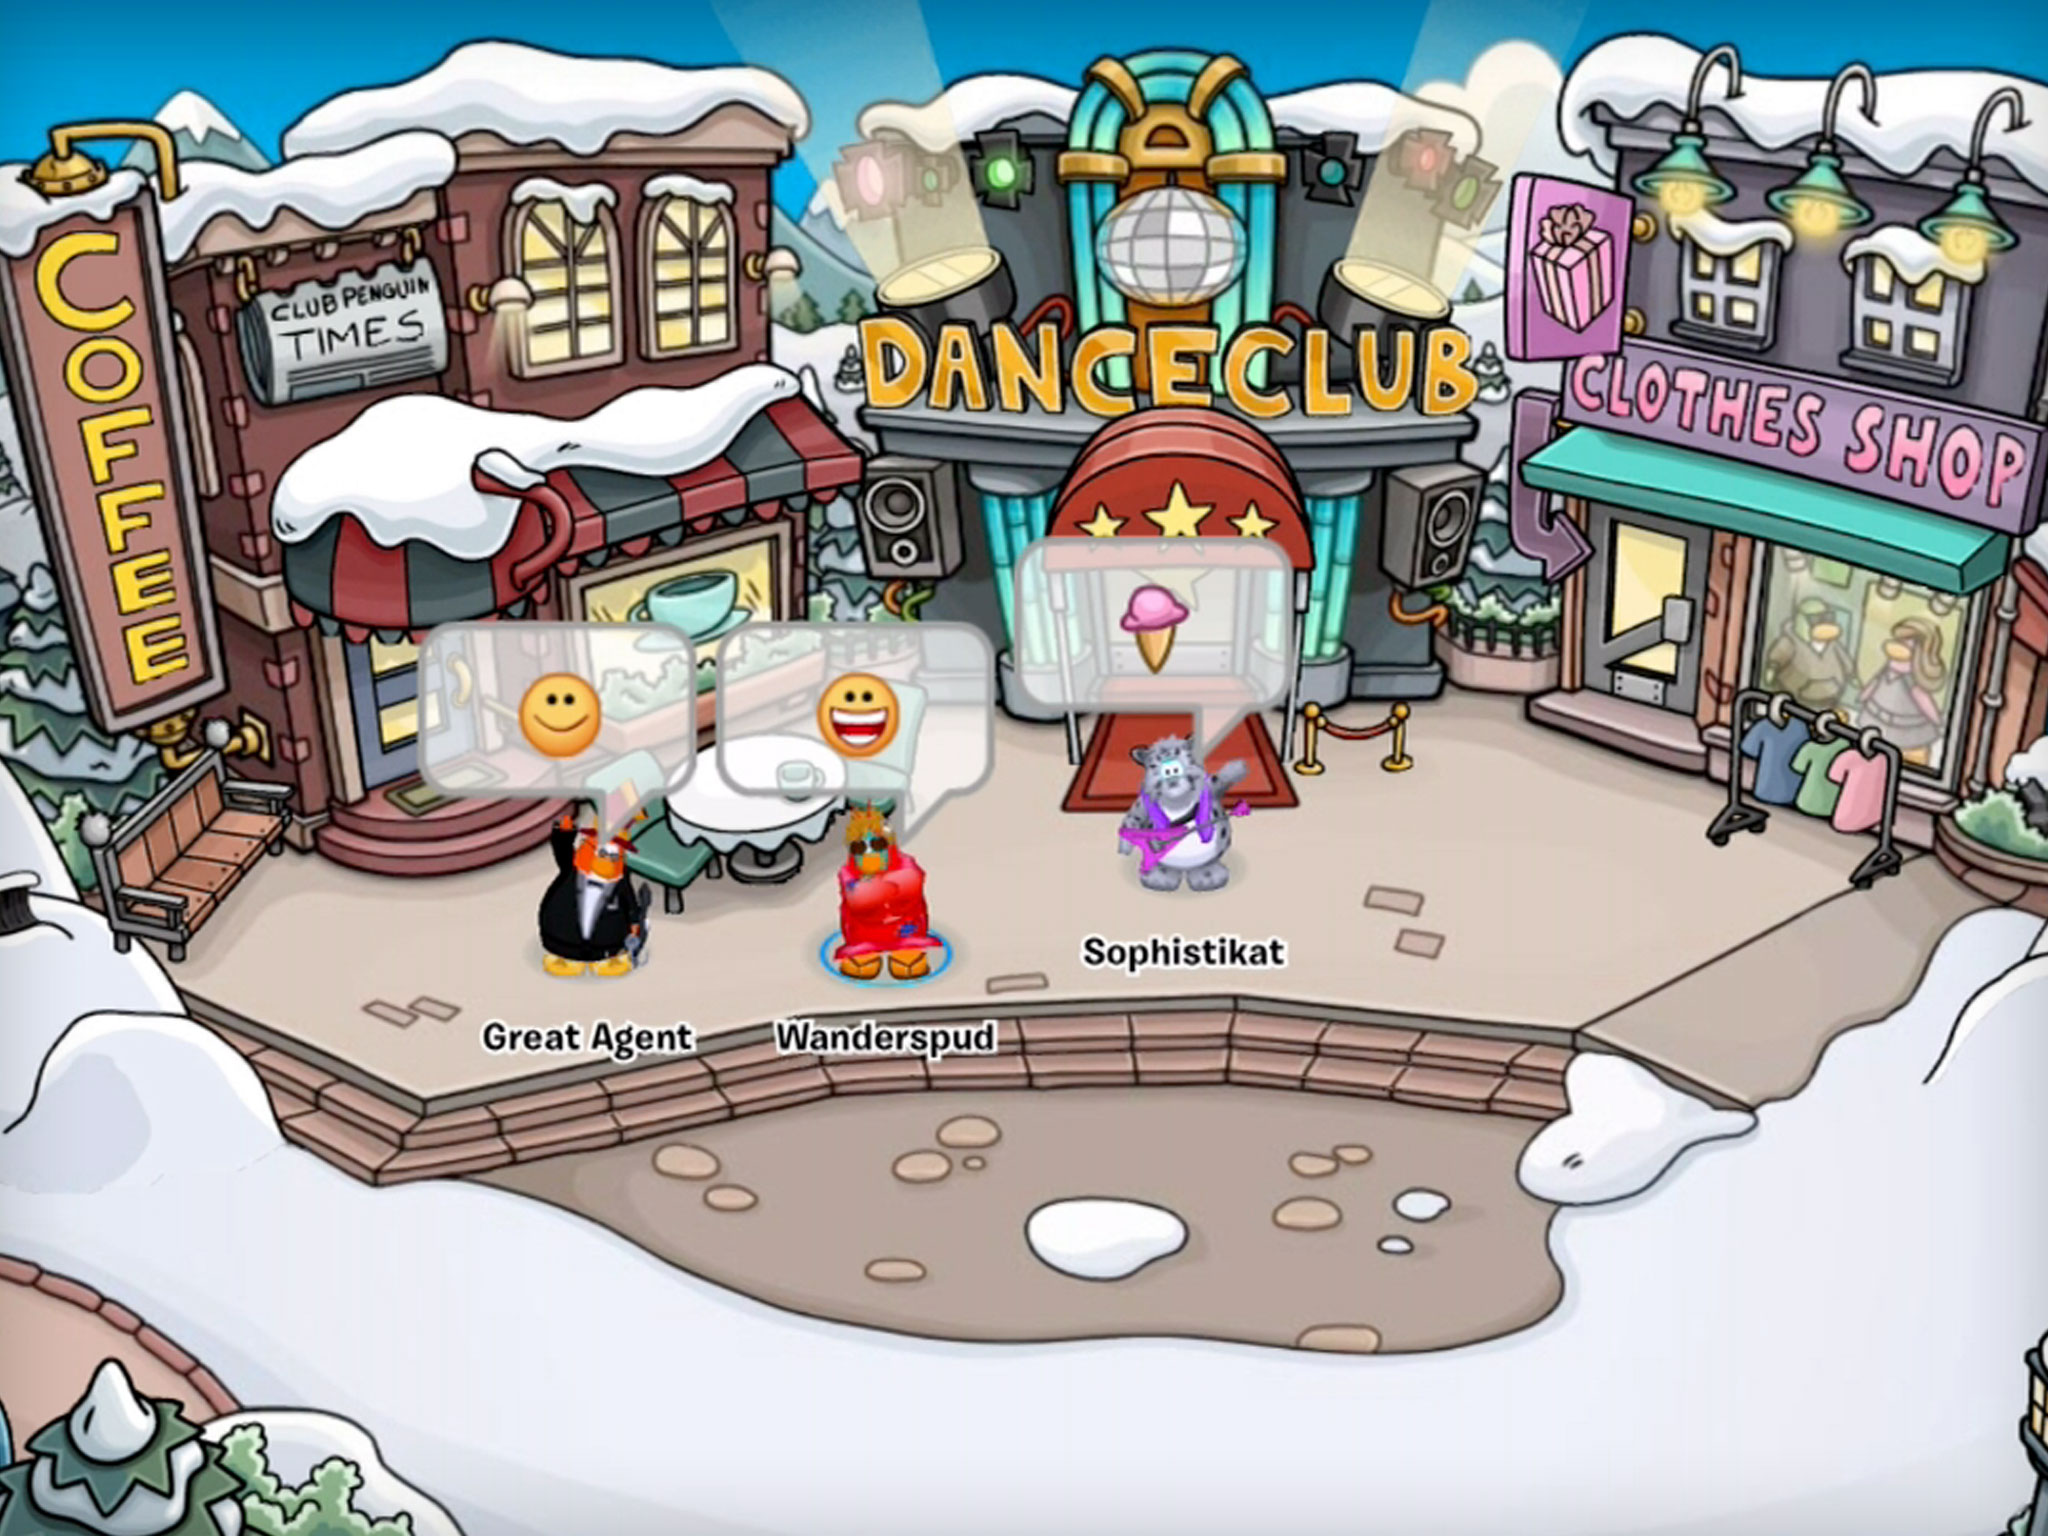 Disney Brings Club Penguin To iPad, iOS and Android Apps Coming In 2014